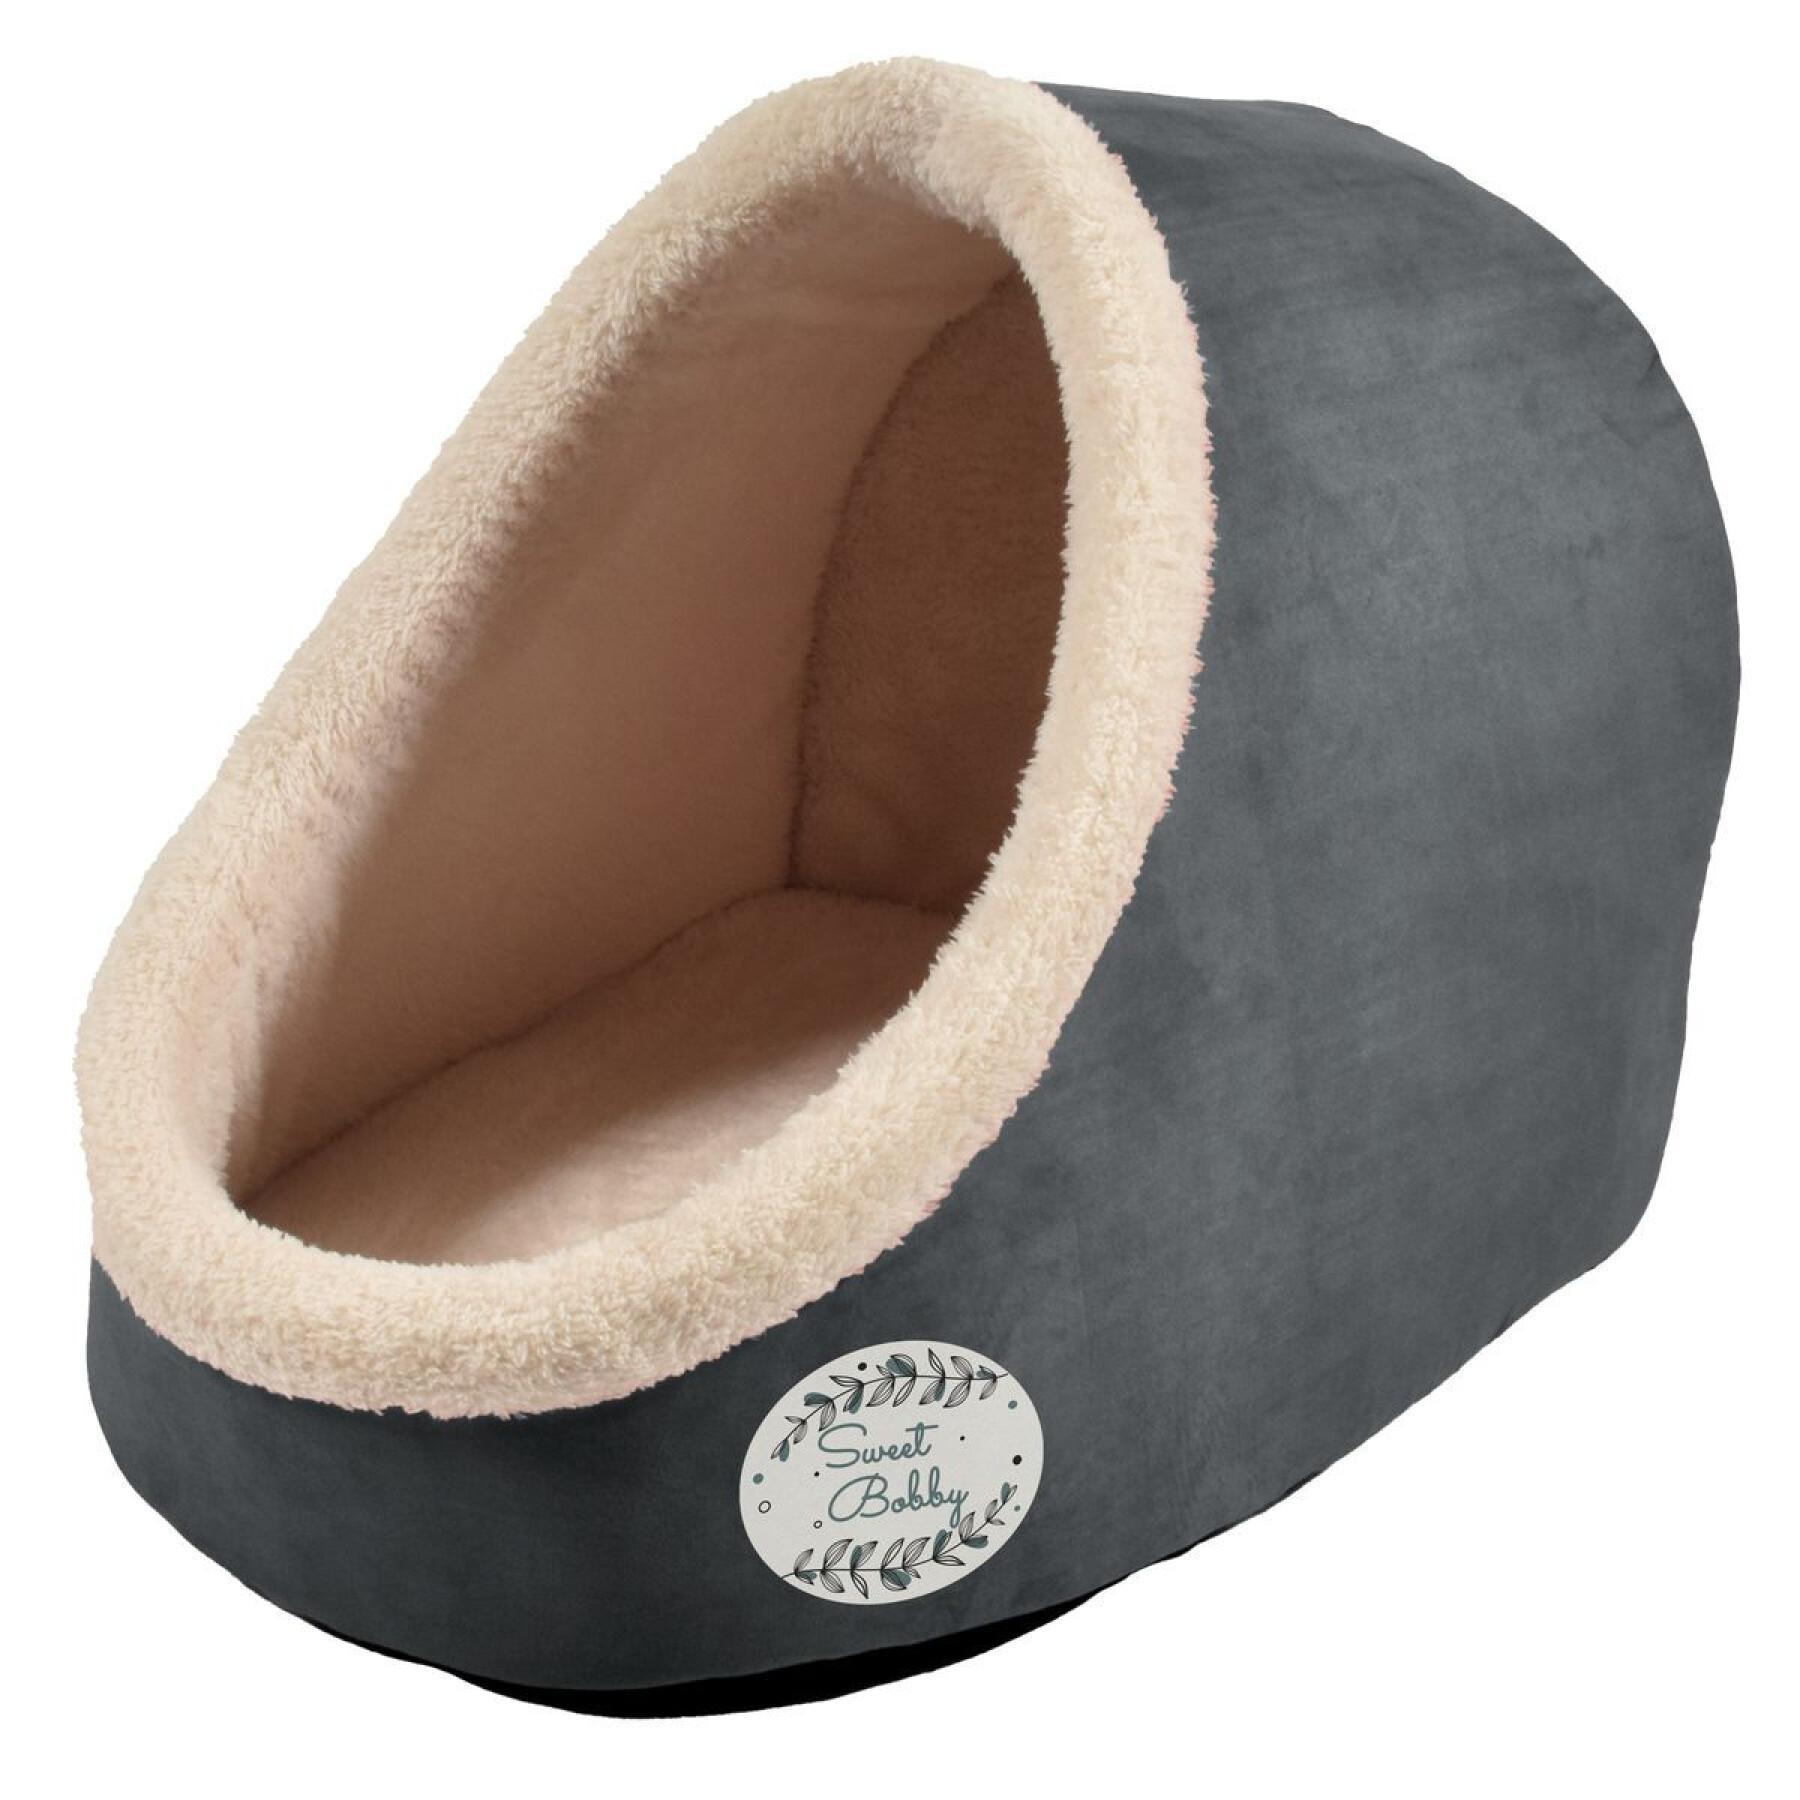 Cat bed Bobby Douce